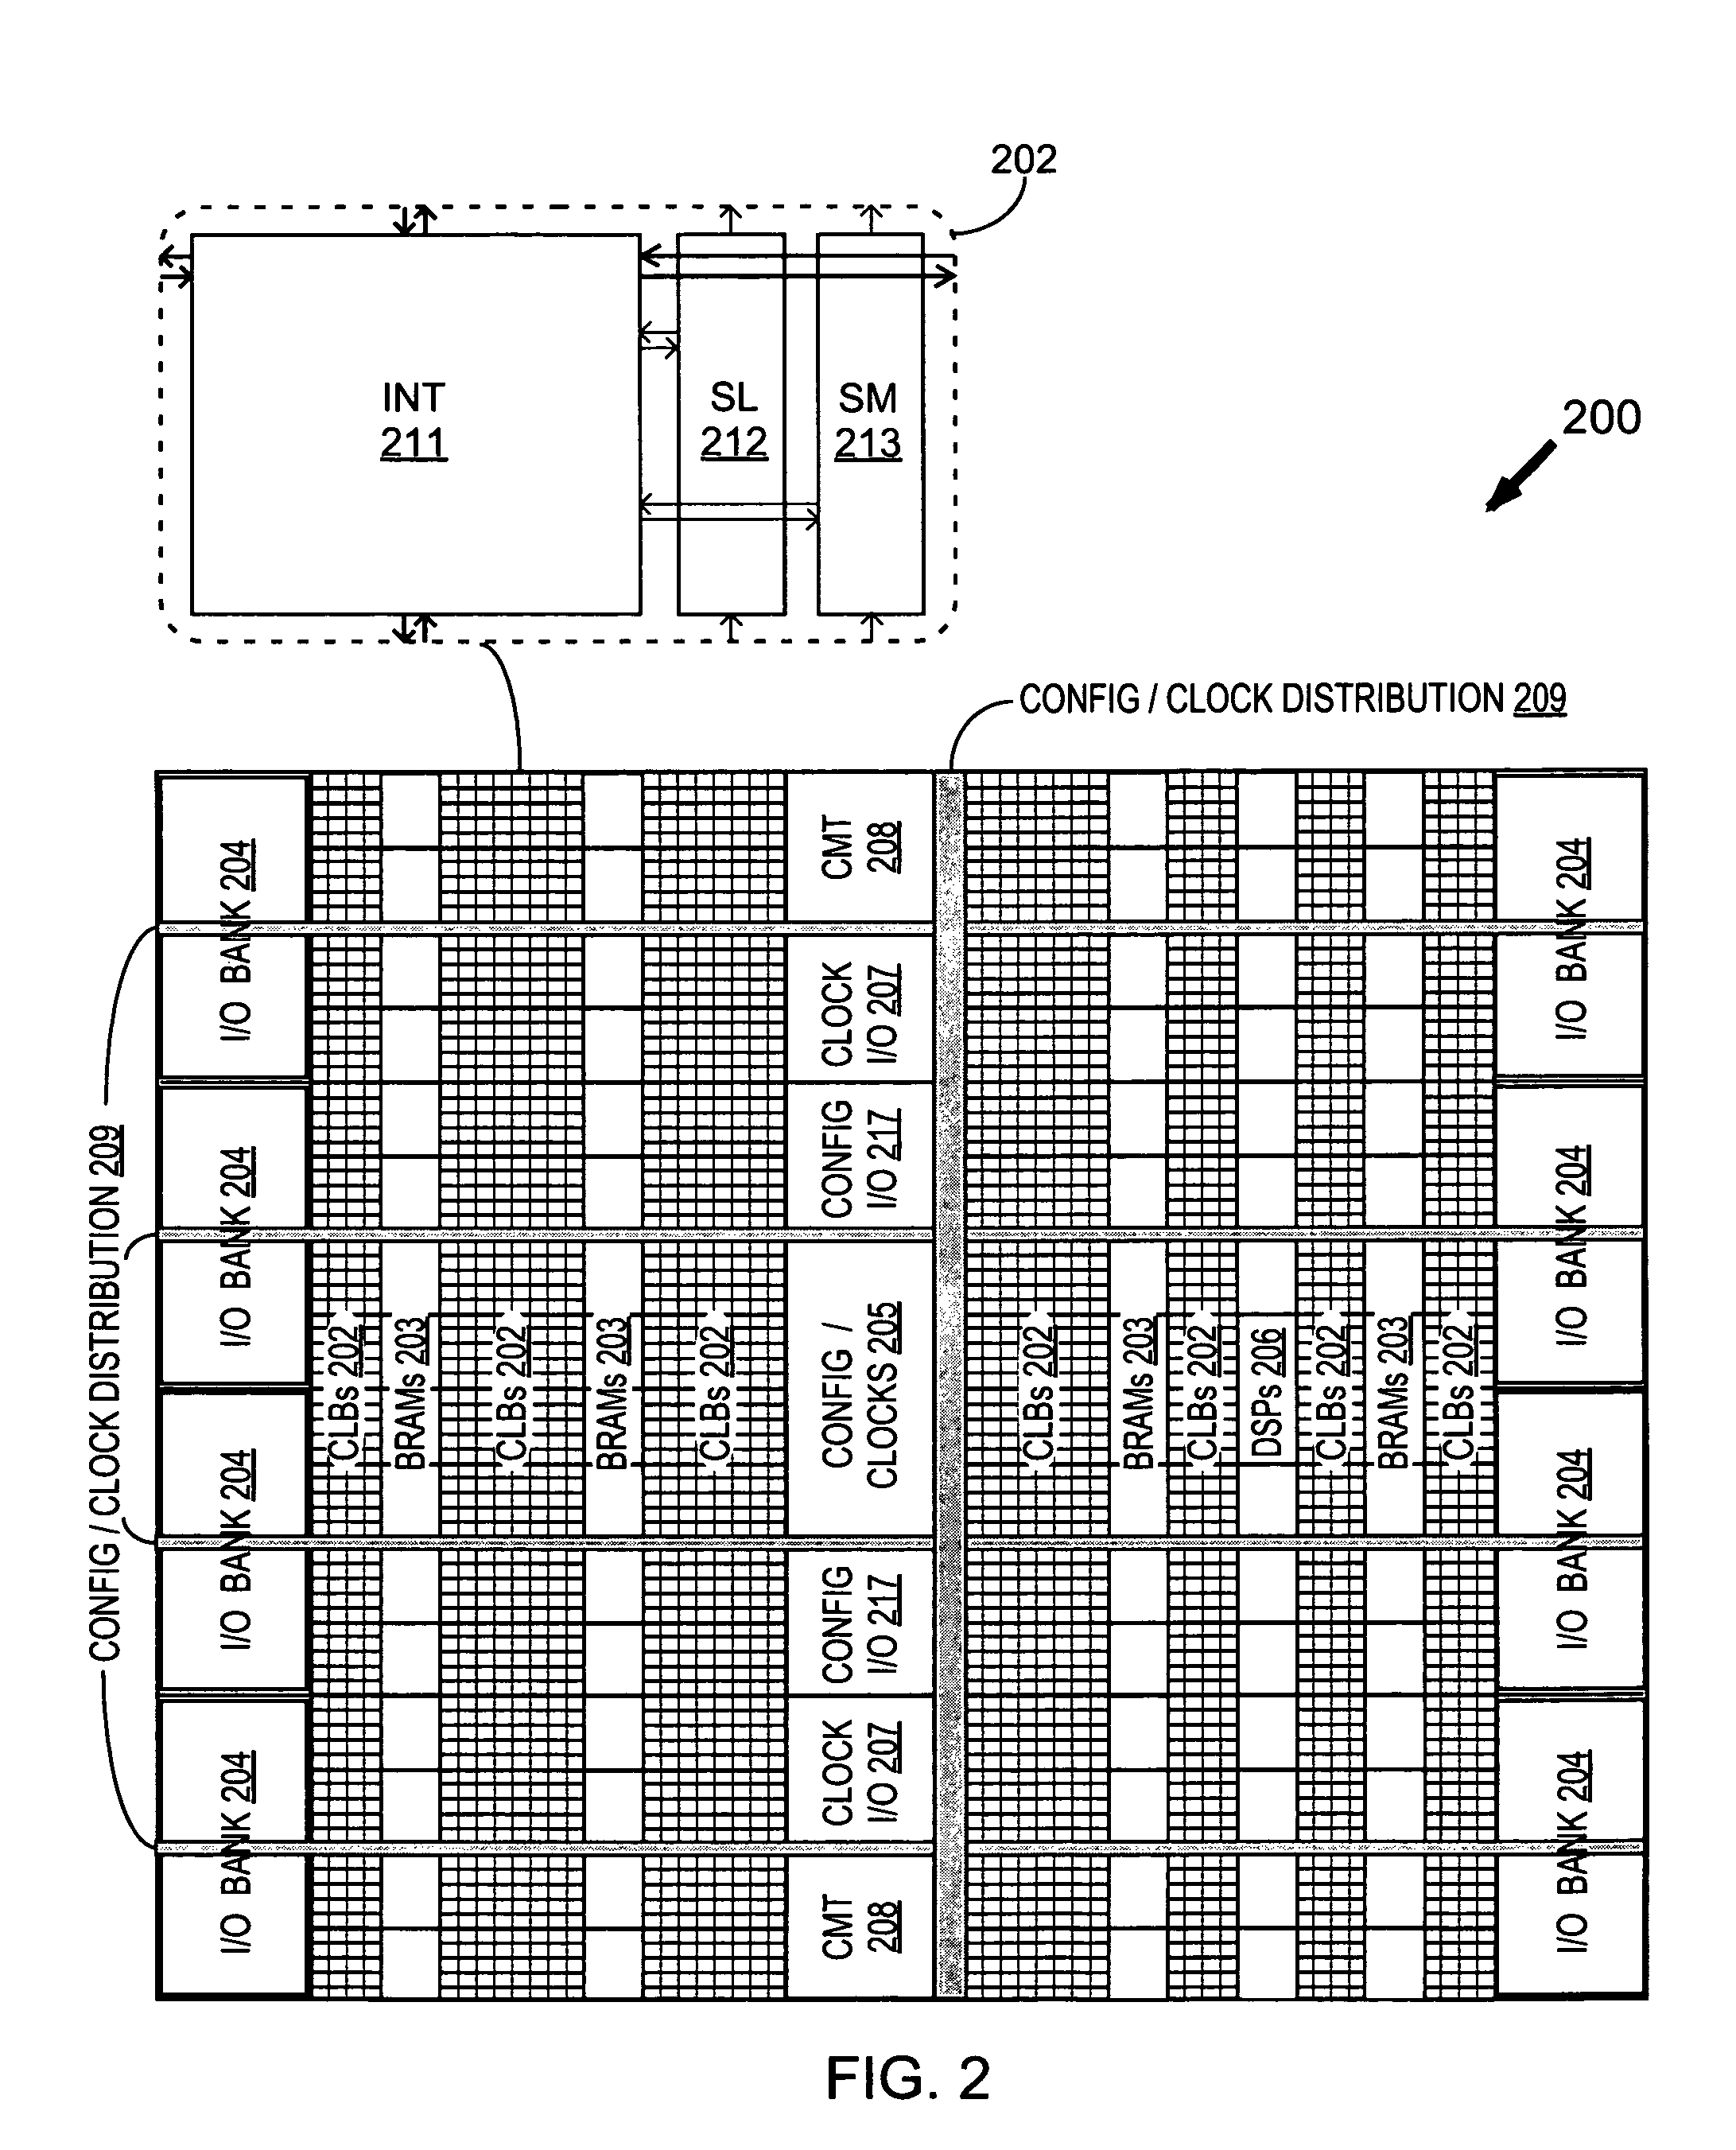 Methods of providing a family of related integrated circuits of different sizes